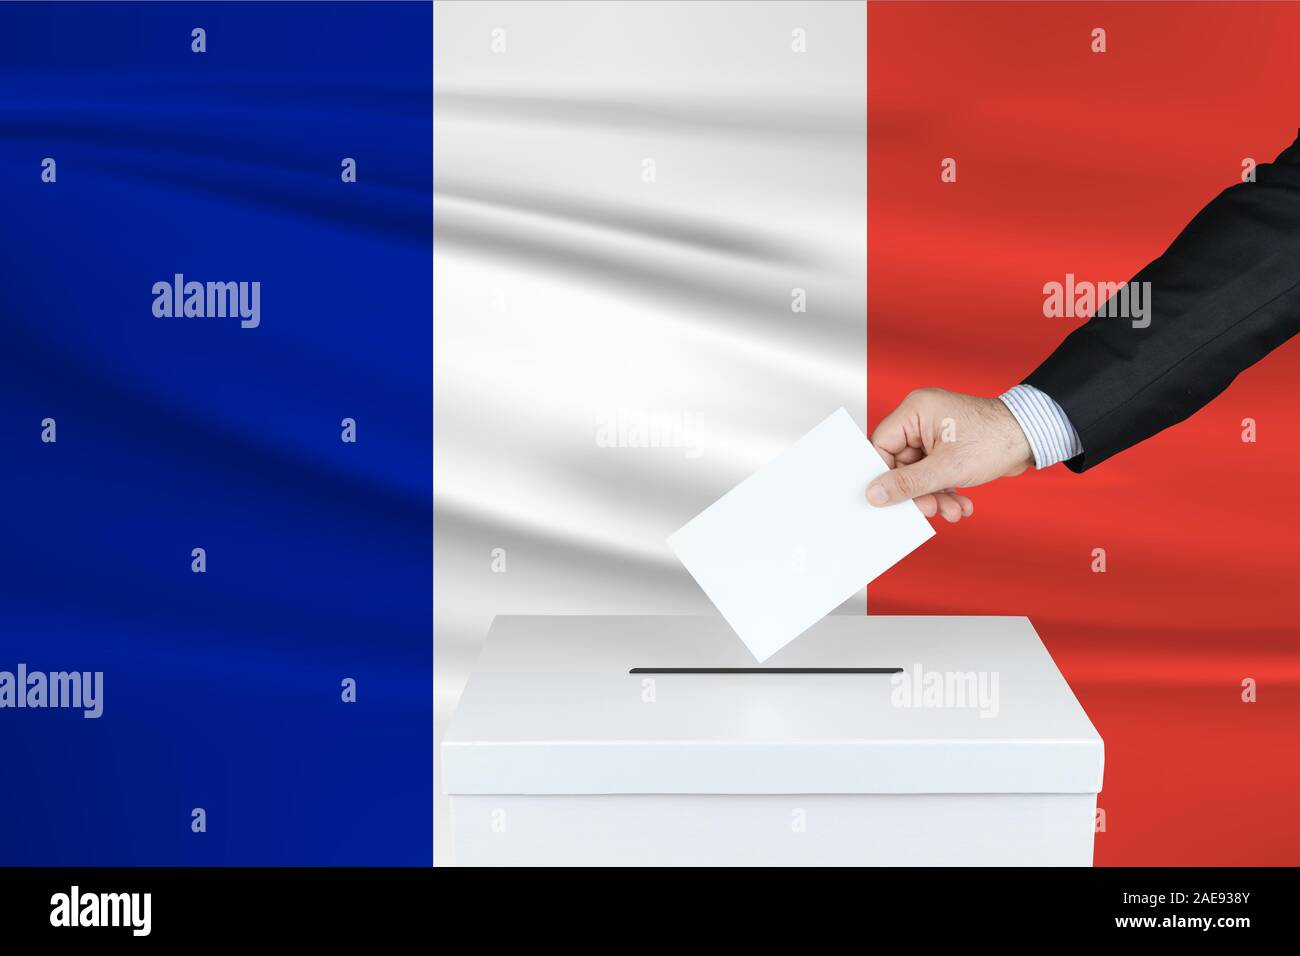 Election in France. The hand of man putting his vote in the ballot box. Waved France flag on background. Stock Photo